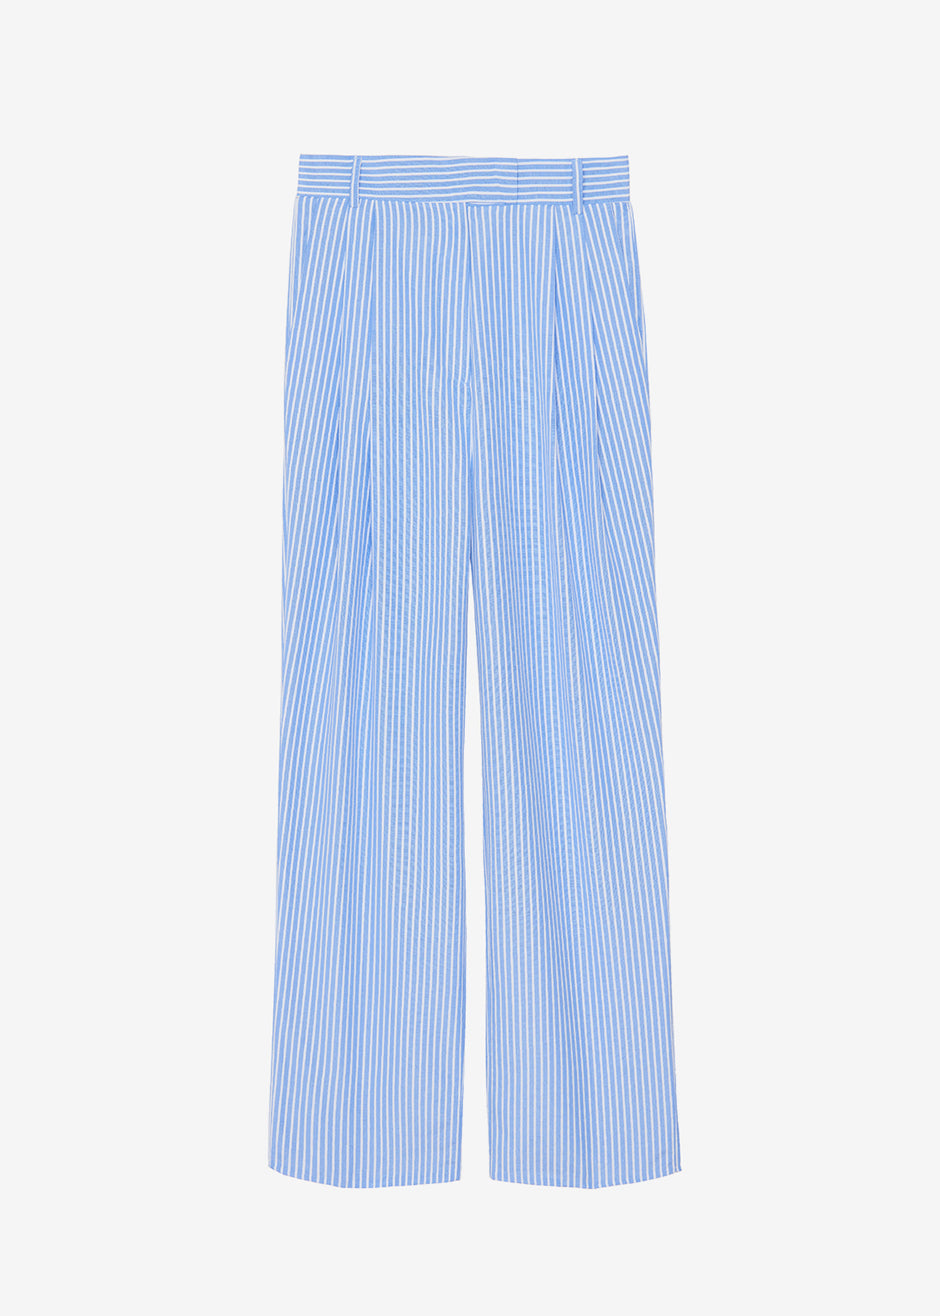 Sky Blue Peg Trousers with Belt for Women – Code 61